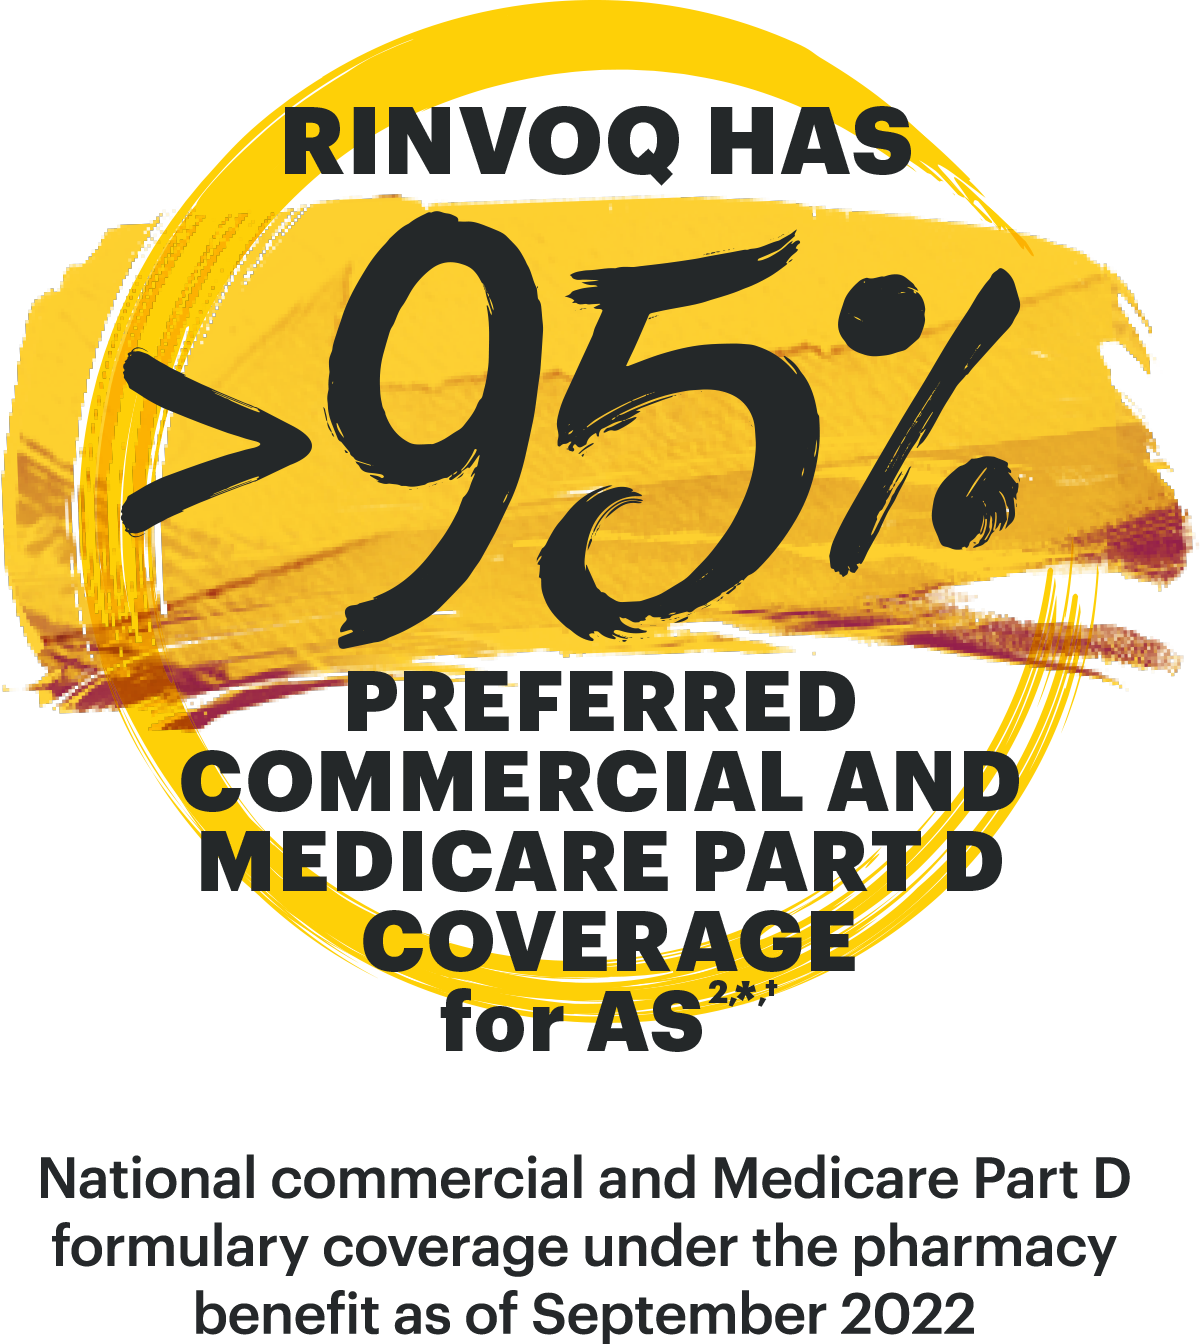 Rinvoq has >95% preferred commercial and medicare part D coverage for AS.